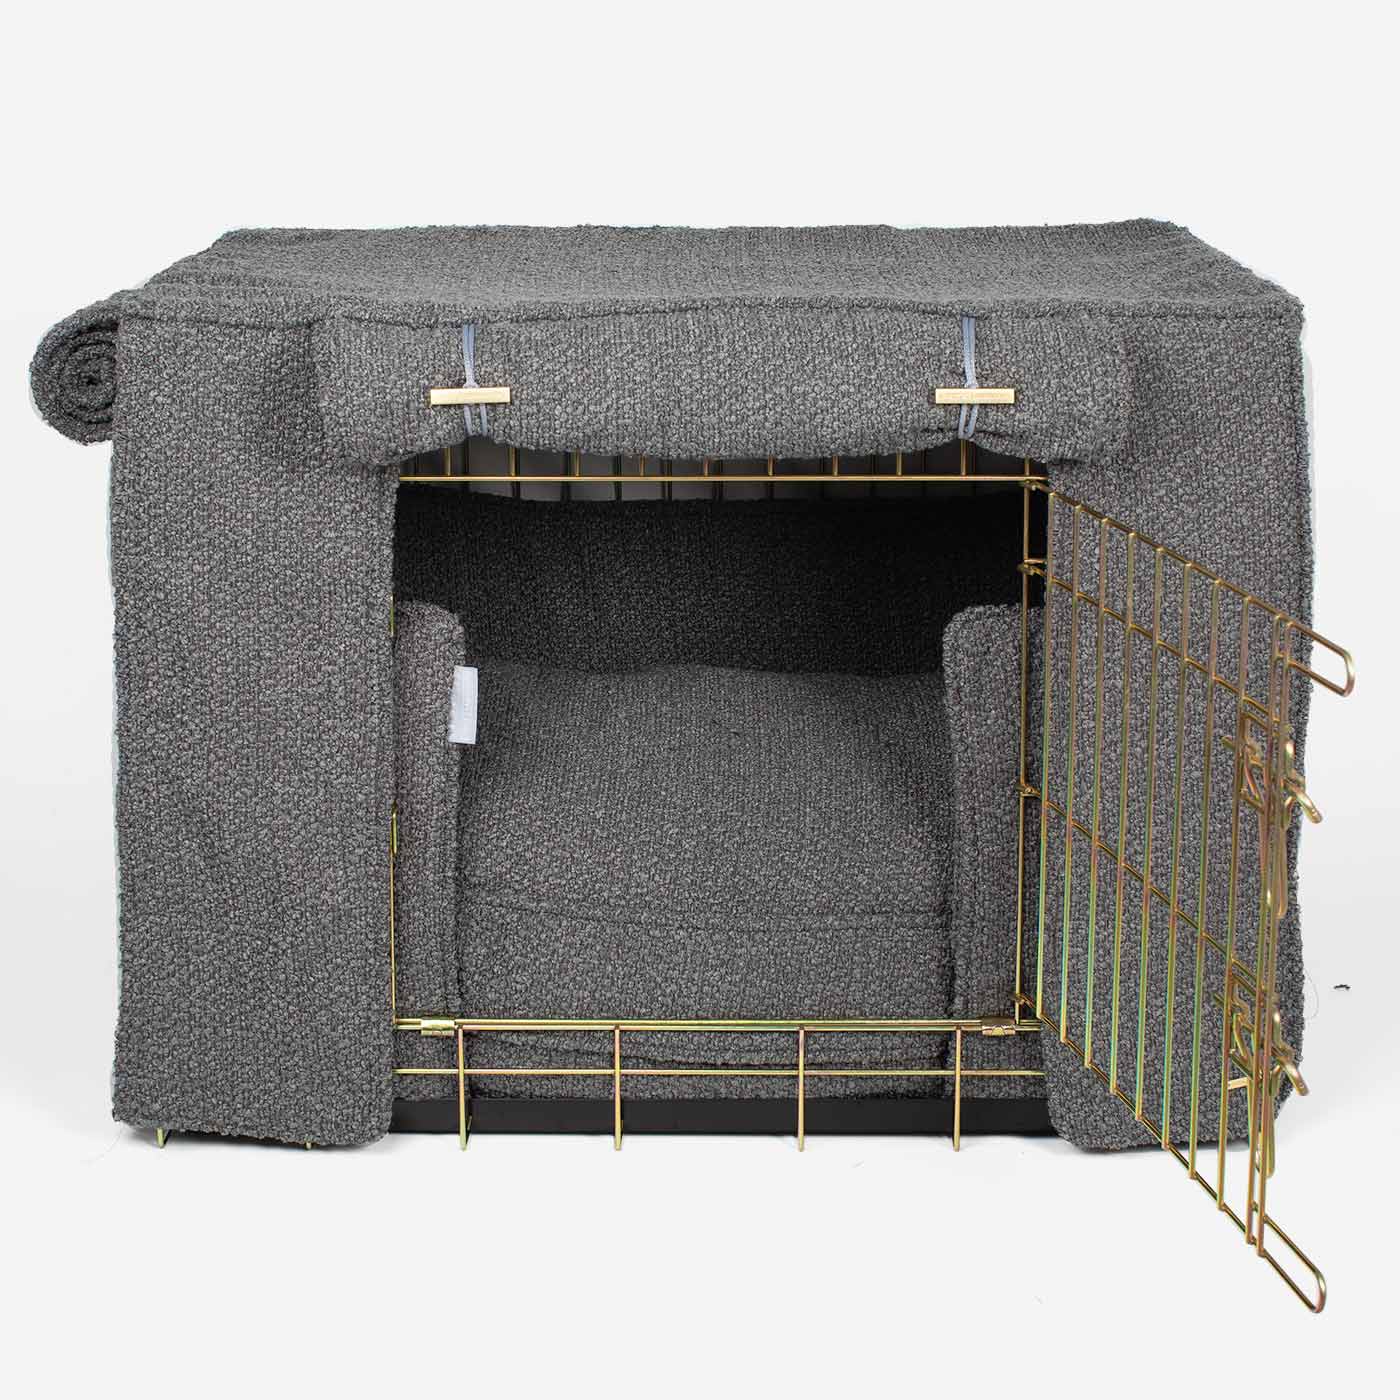 [color:gold] Luxury Heavy Duty Dog Cage, In Stunning Granite Bouclé Cage Set, The Perfect Dog Cage Set For Building The Ultimate Pet Den! Dog Cage Cover Available To Personalize at Lords & Labradors US